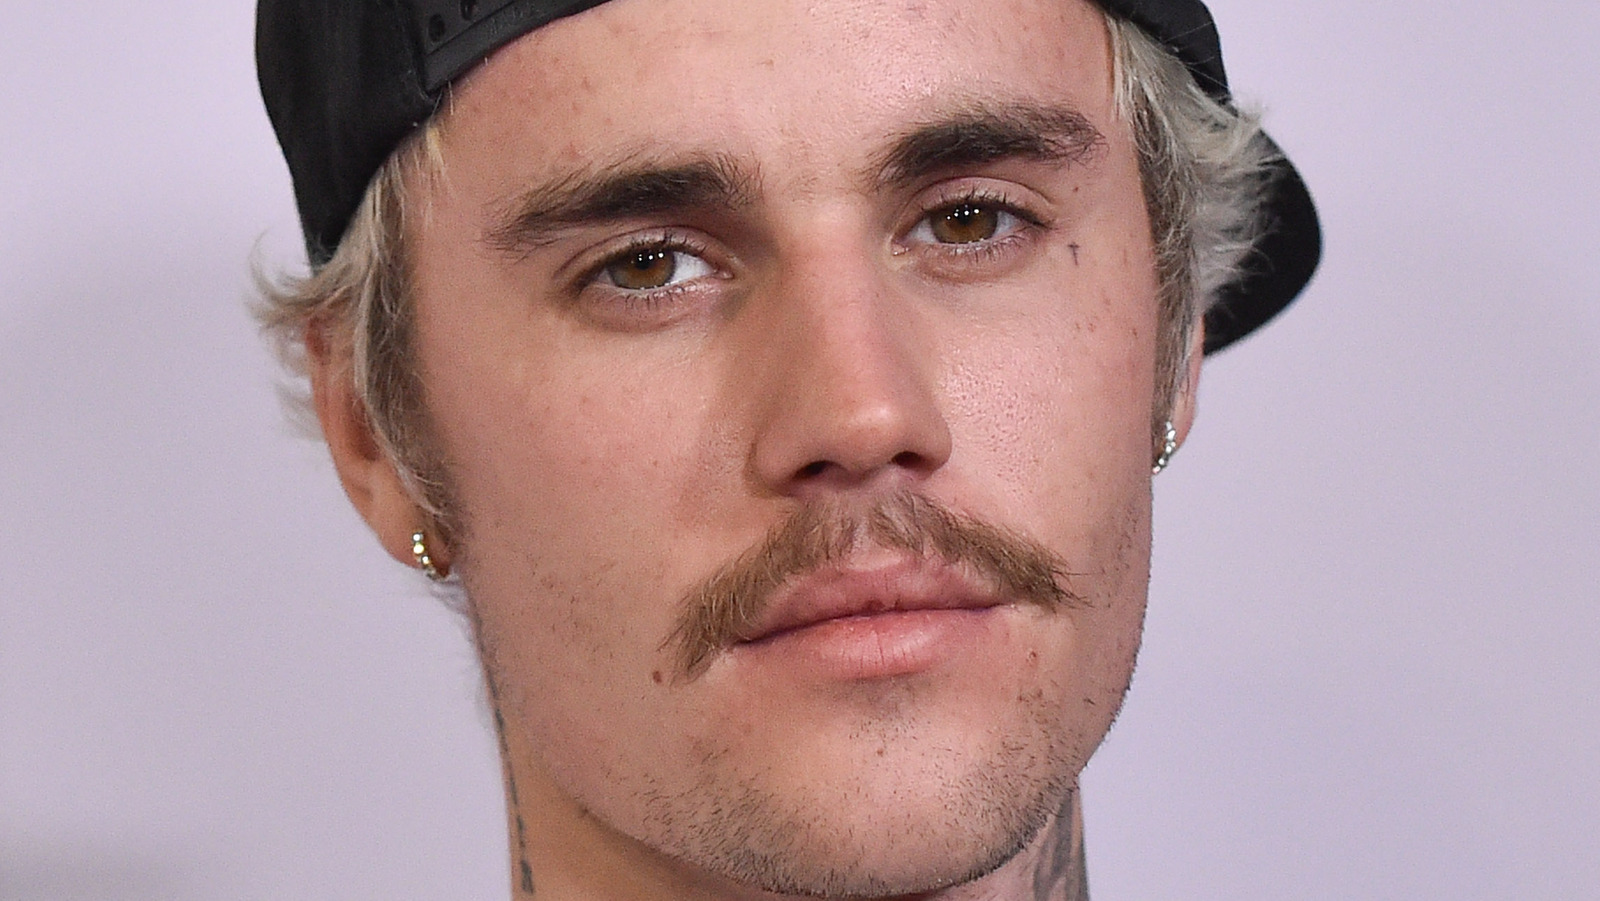 Justin Bieber accused of cultural appropriation over hairstyle